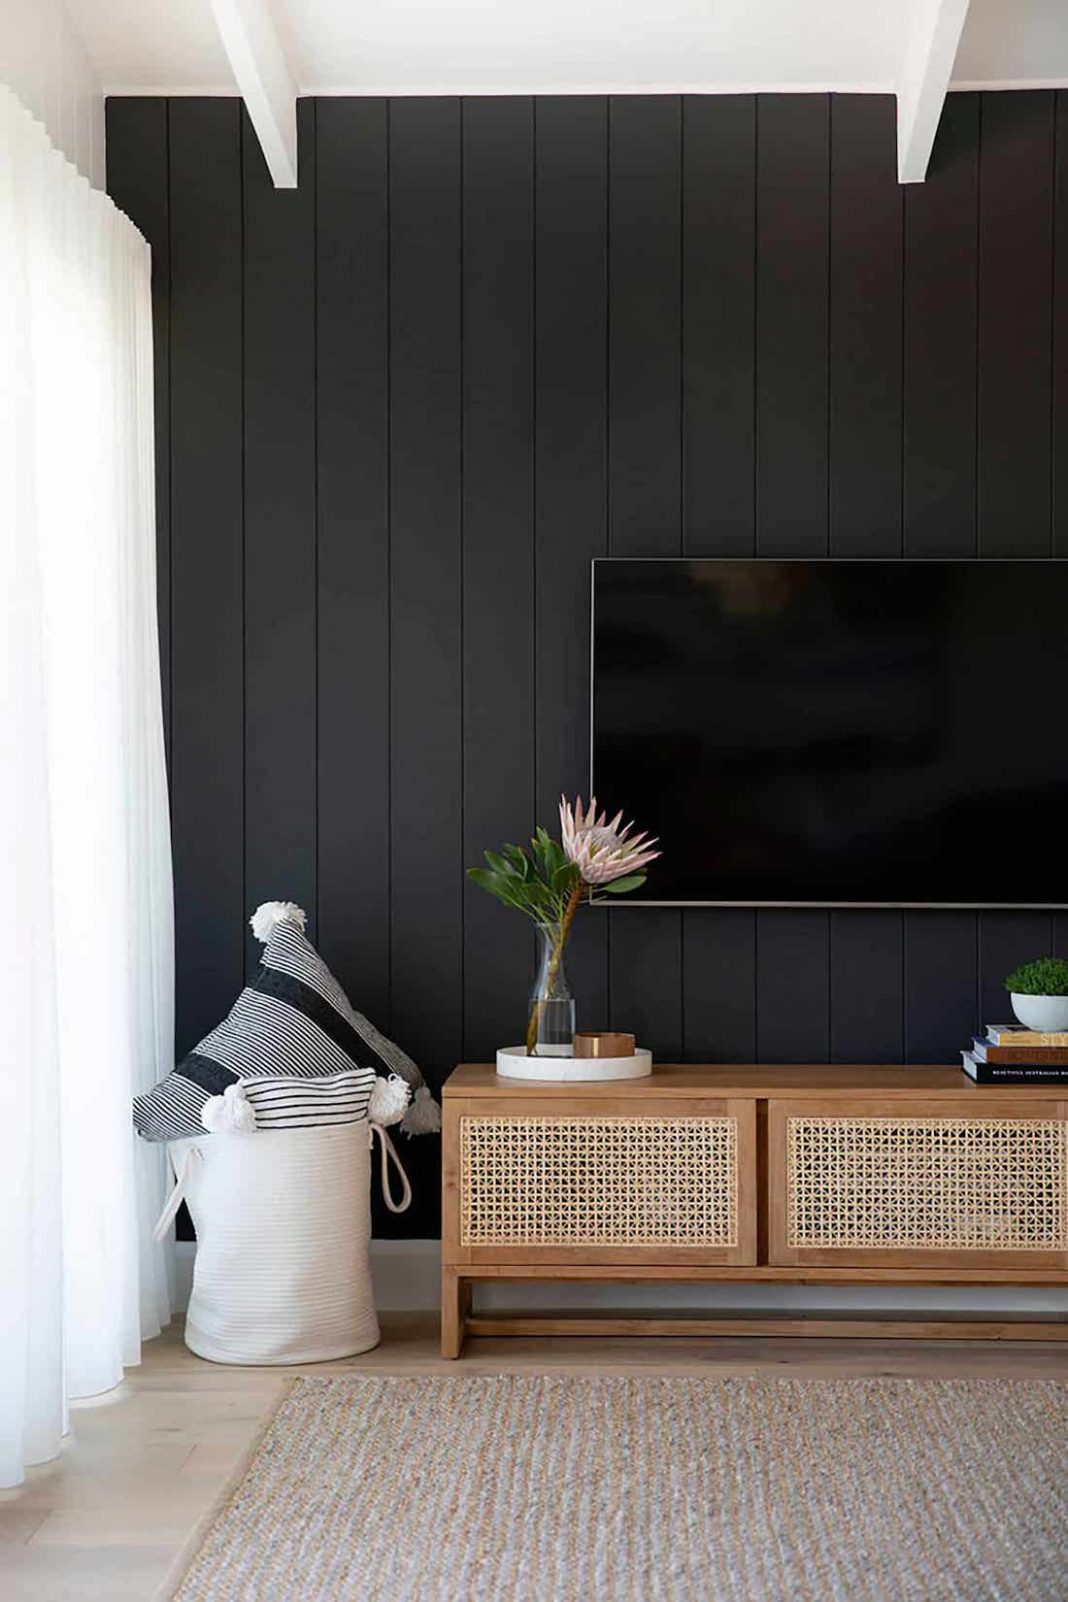 Go bold and get inspired with black walls | Style Curator